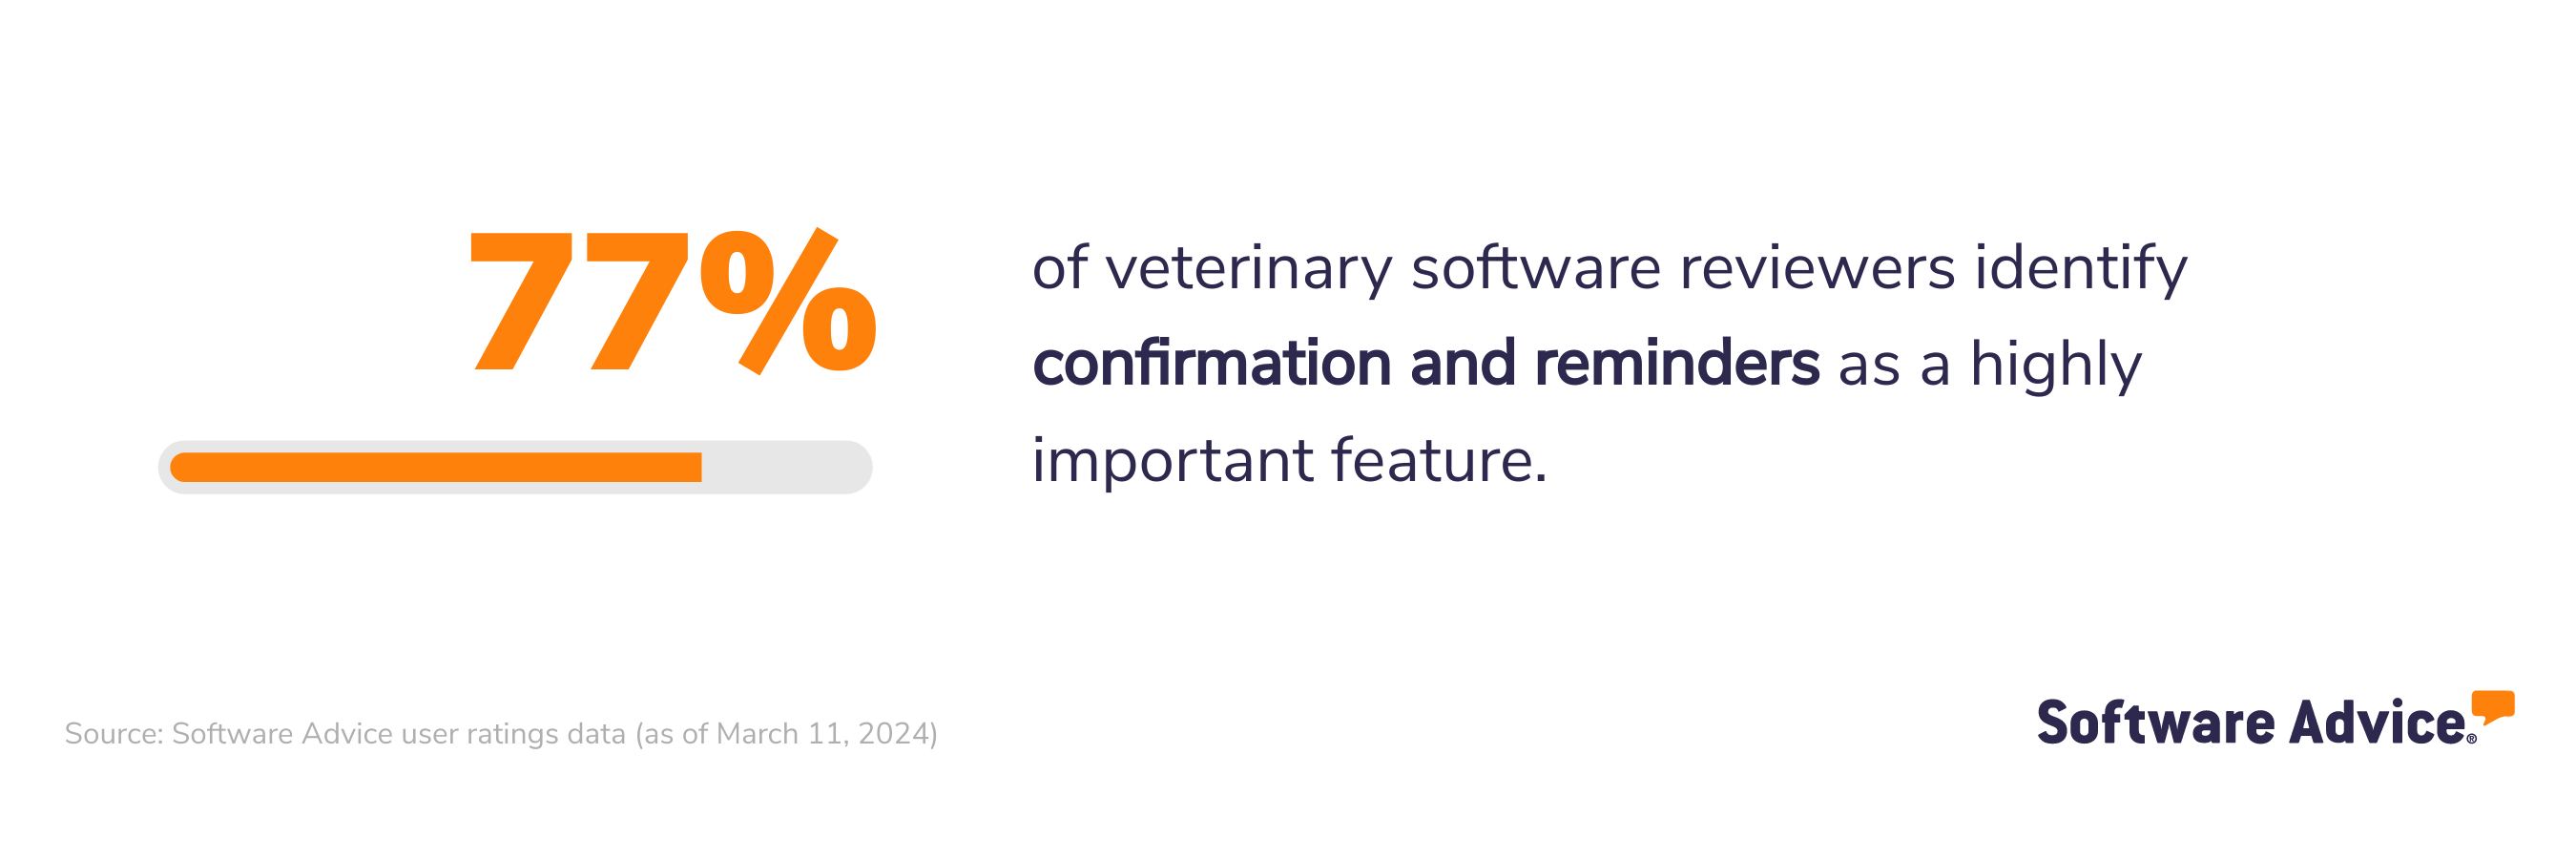 77% of veterinary software reviewers identify confirmation and reminders as a highly important feature.